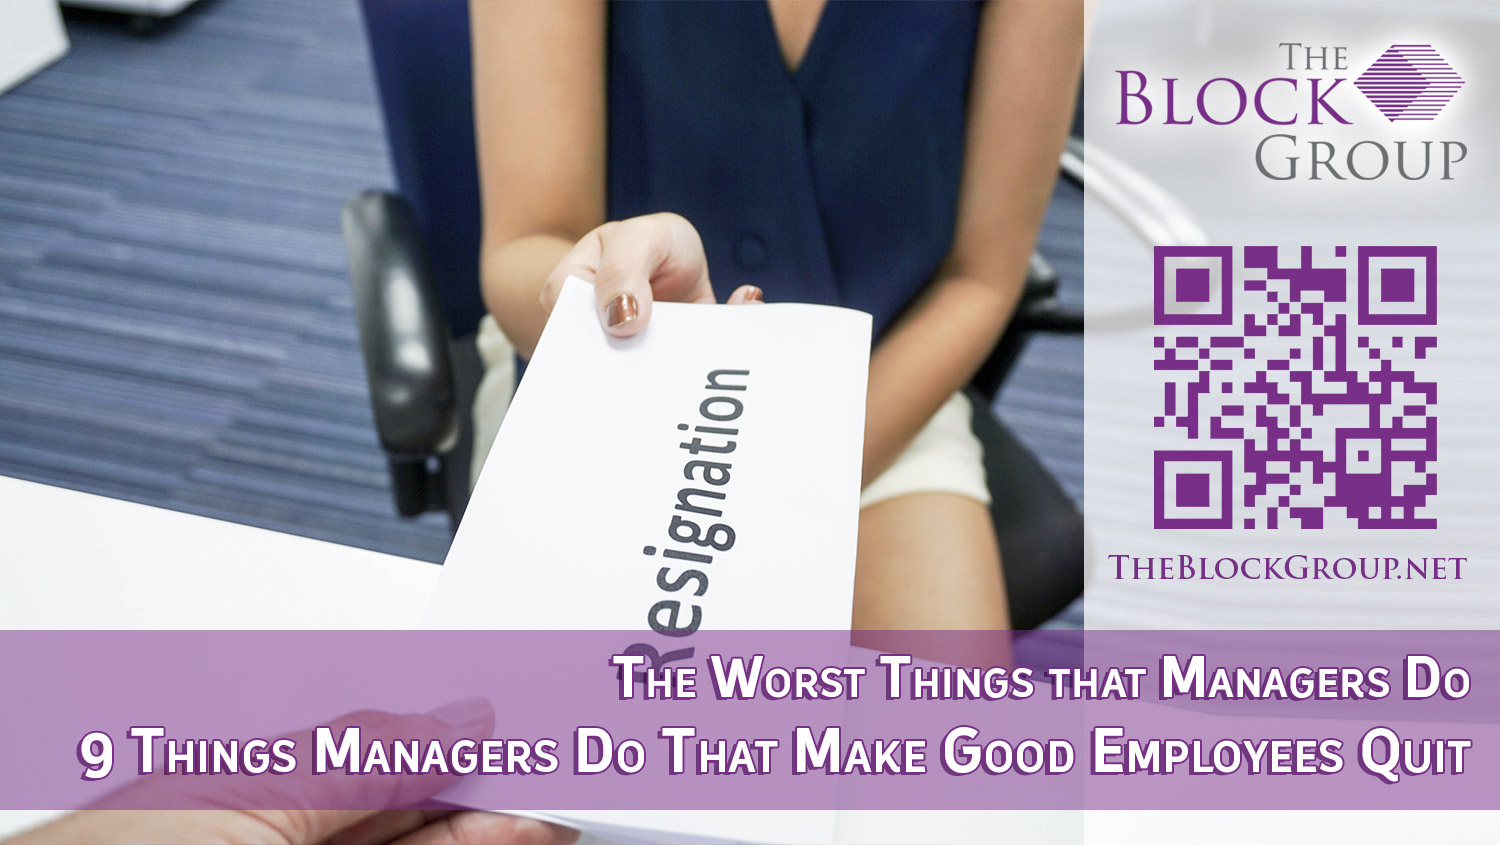 BIG080617-Things-Managers-Do-That-Make-Good-Employees-Quit